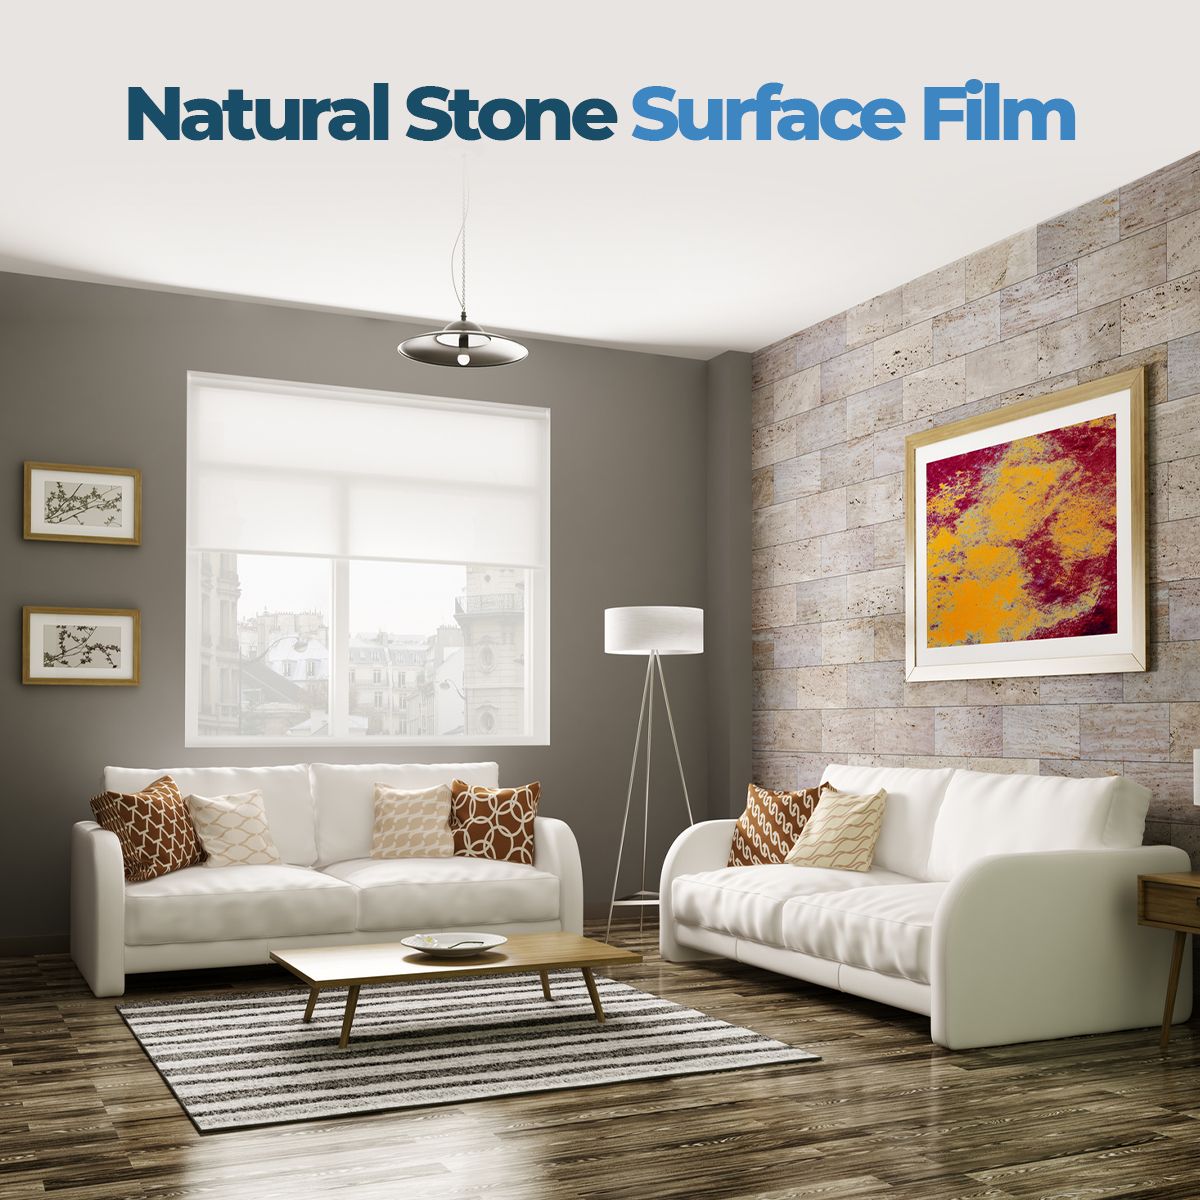 Natural Stone Surface Film